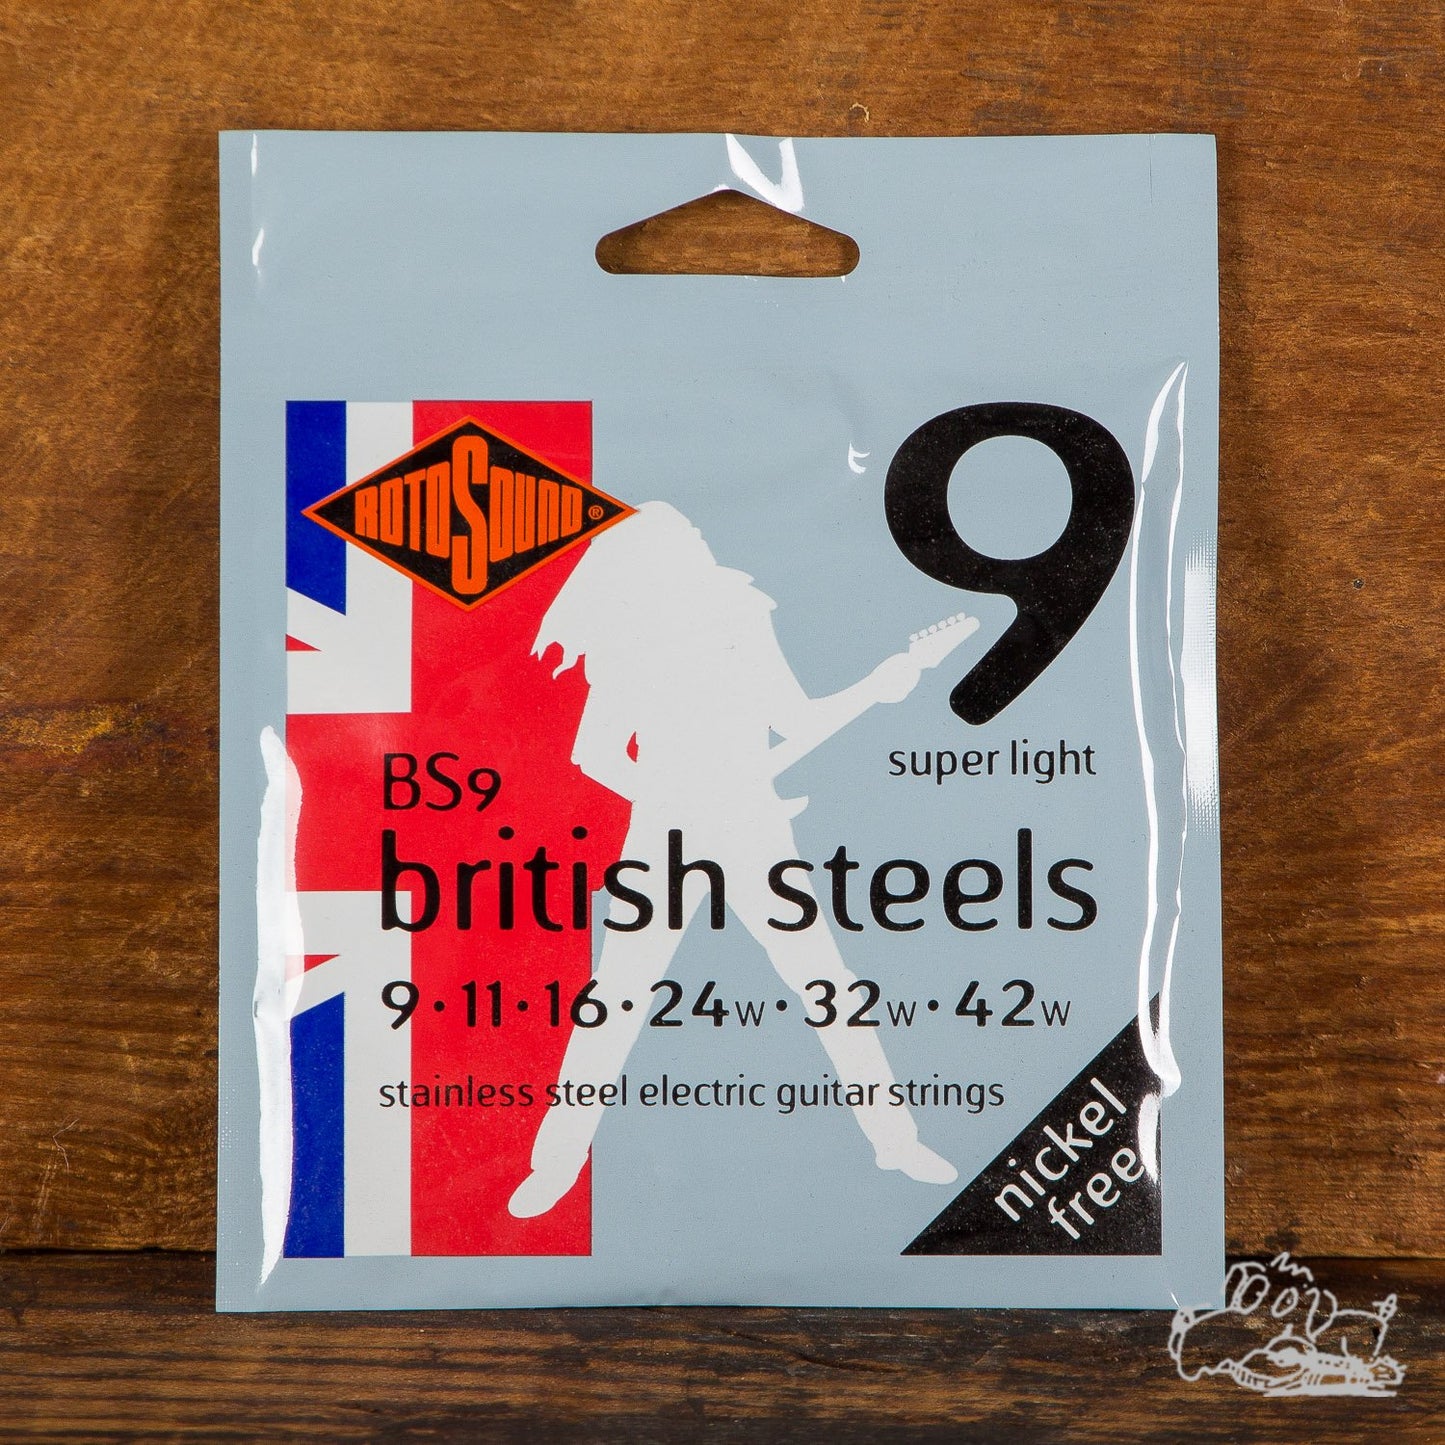 Rotosound British Steel Stainless Steel Electric Guitar Strings 9s, 10s, and 11s